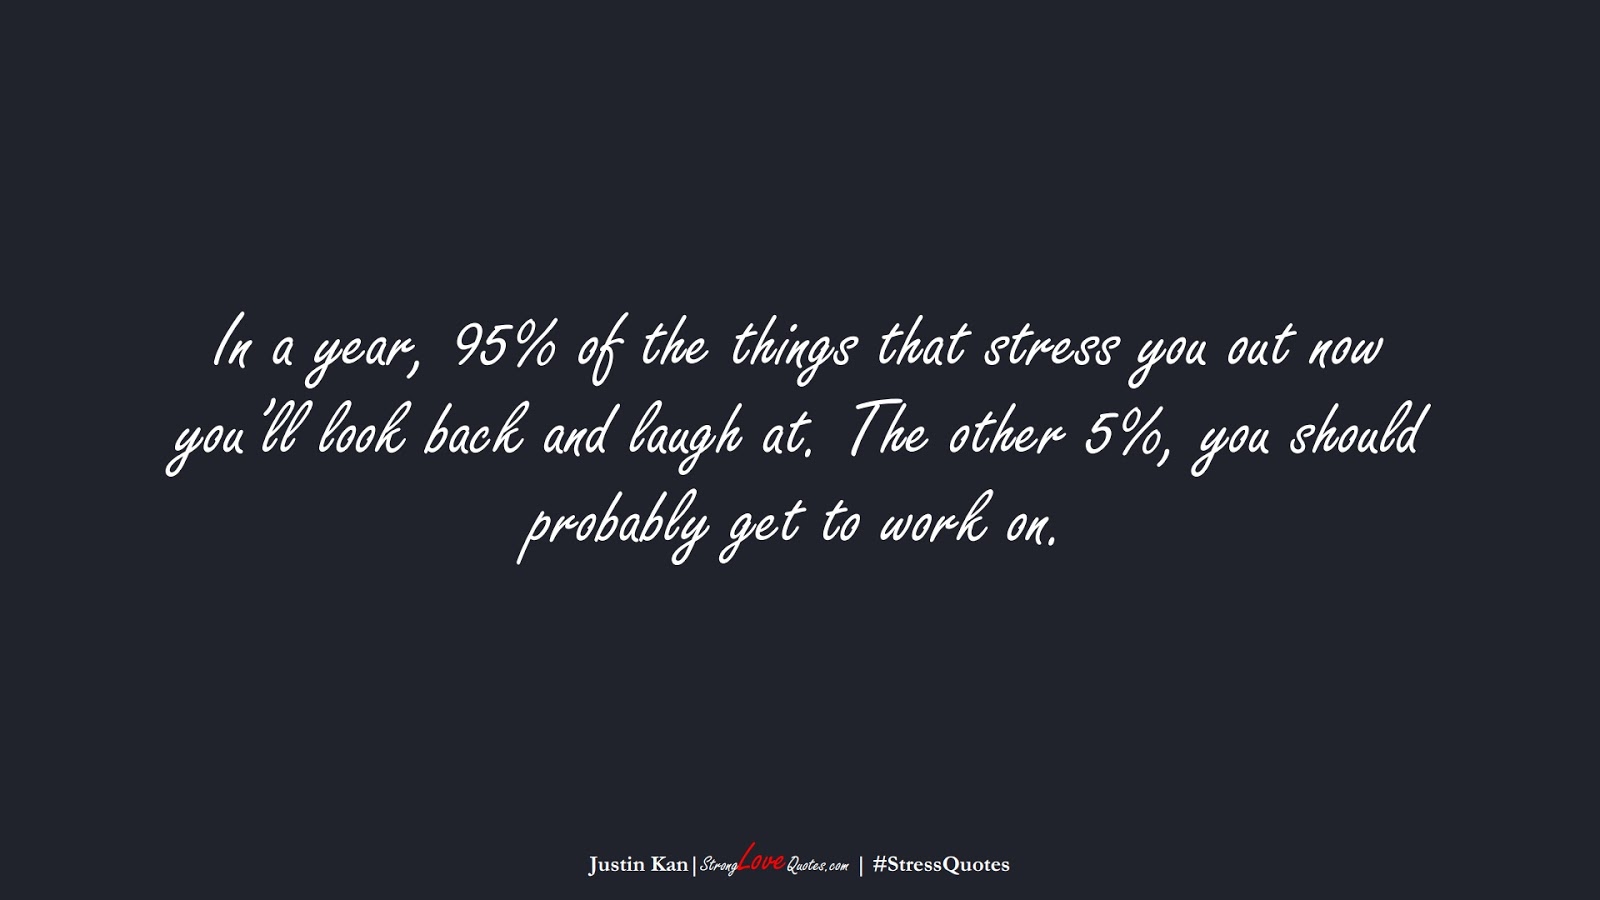 In a year, 95% of the things that stress you out now you’ll look back and laugh at. The other 5%, you should probably get to work on. (Justin Kan);  #StressQuotes